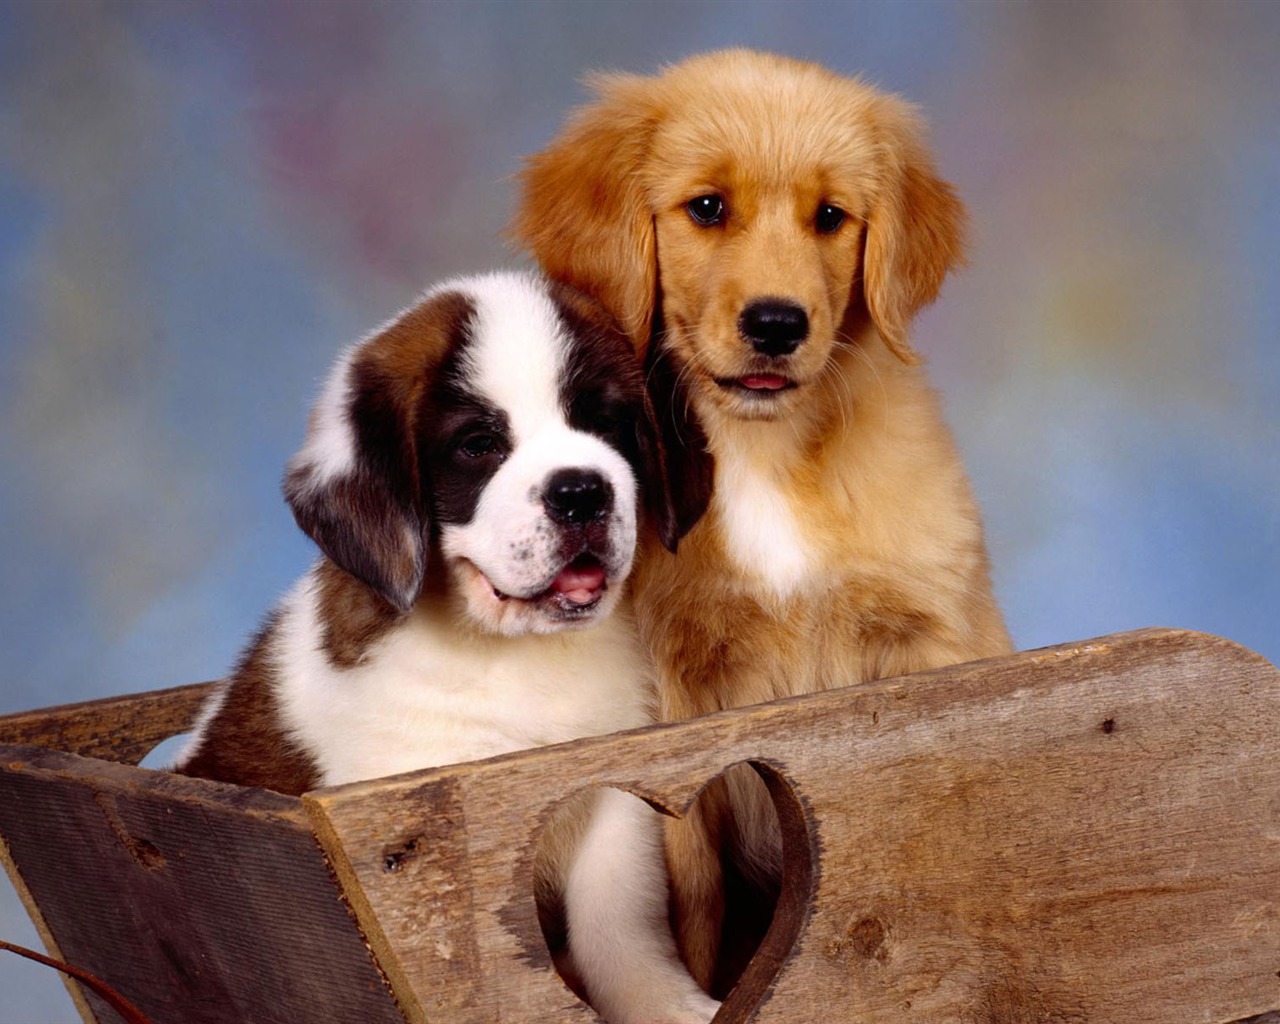 Puppy Photo HD wallpapers (2) #7 - 1280x1024